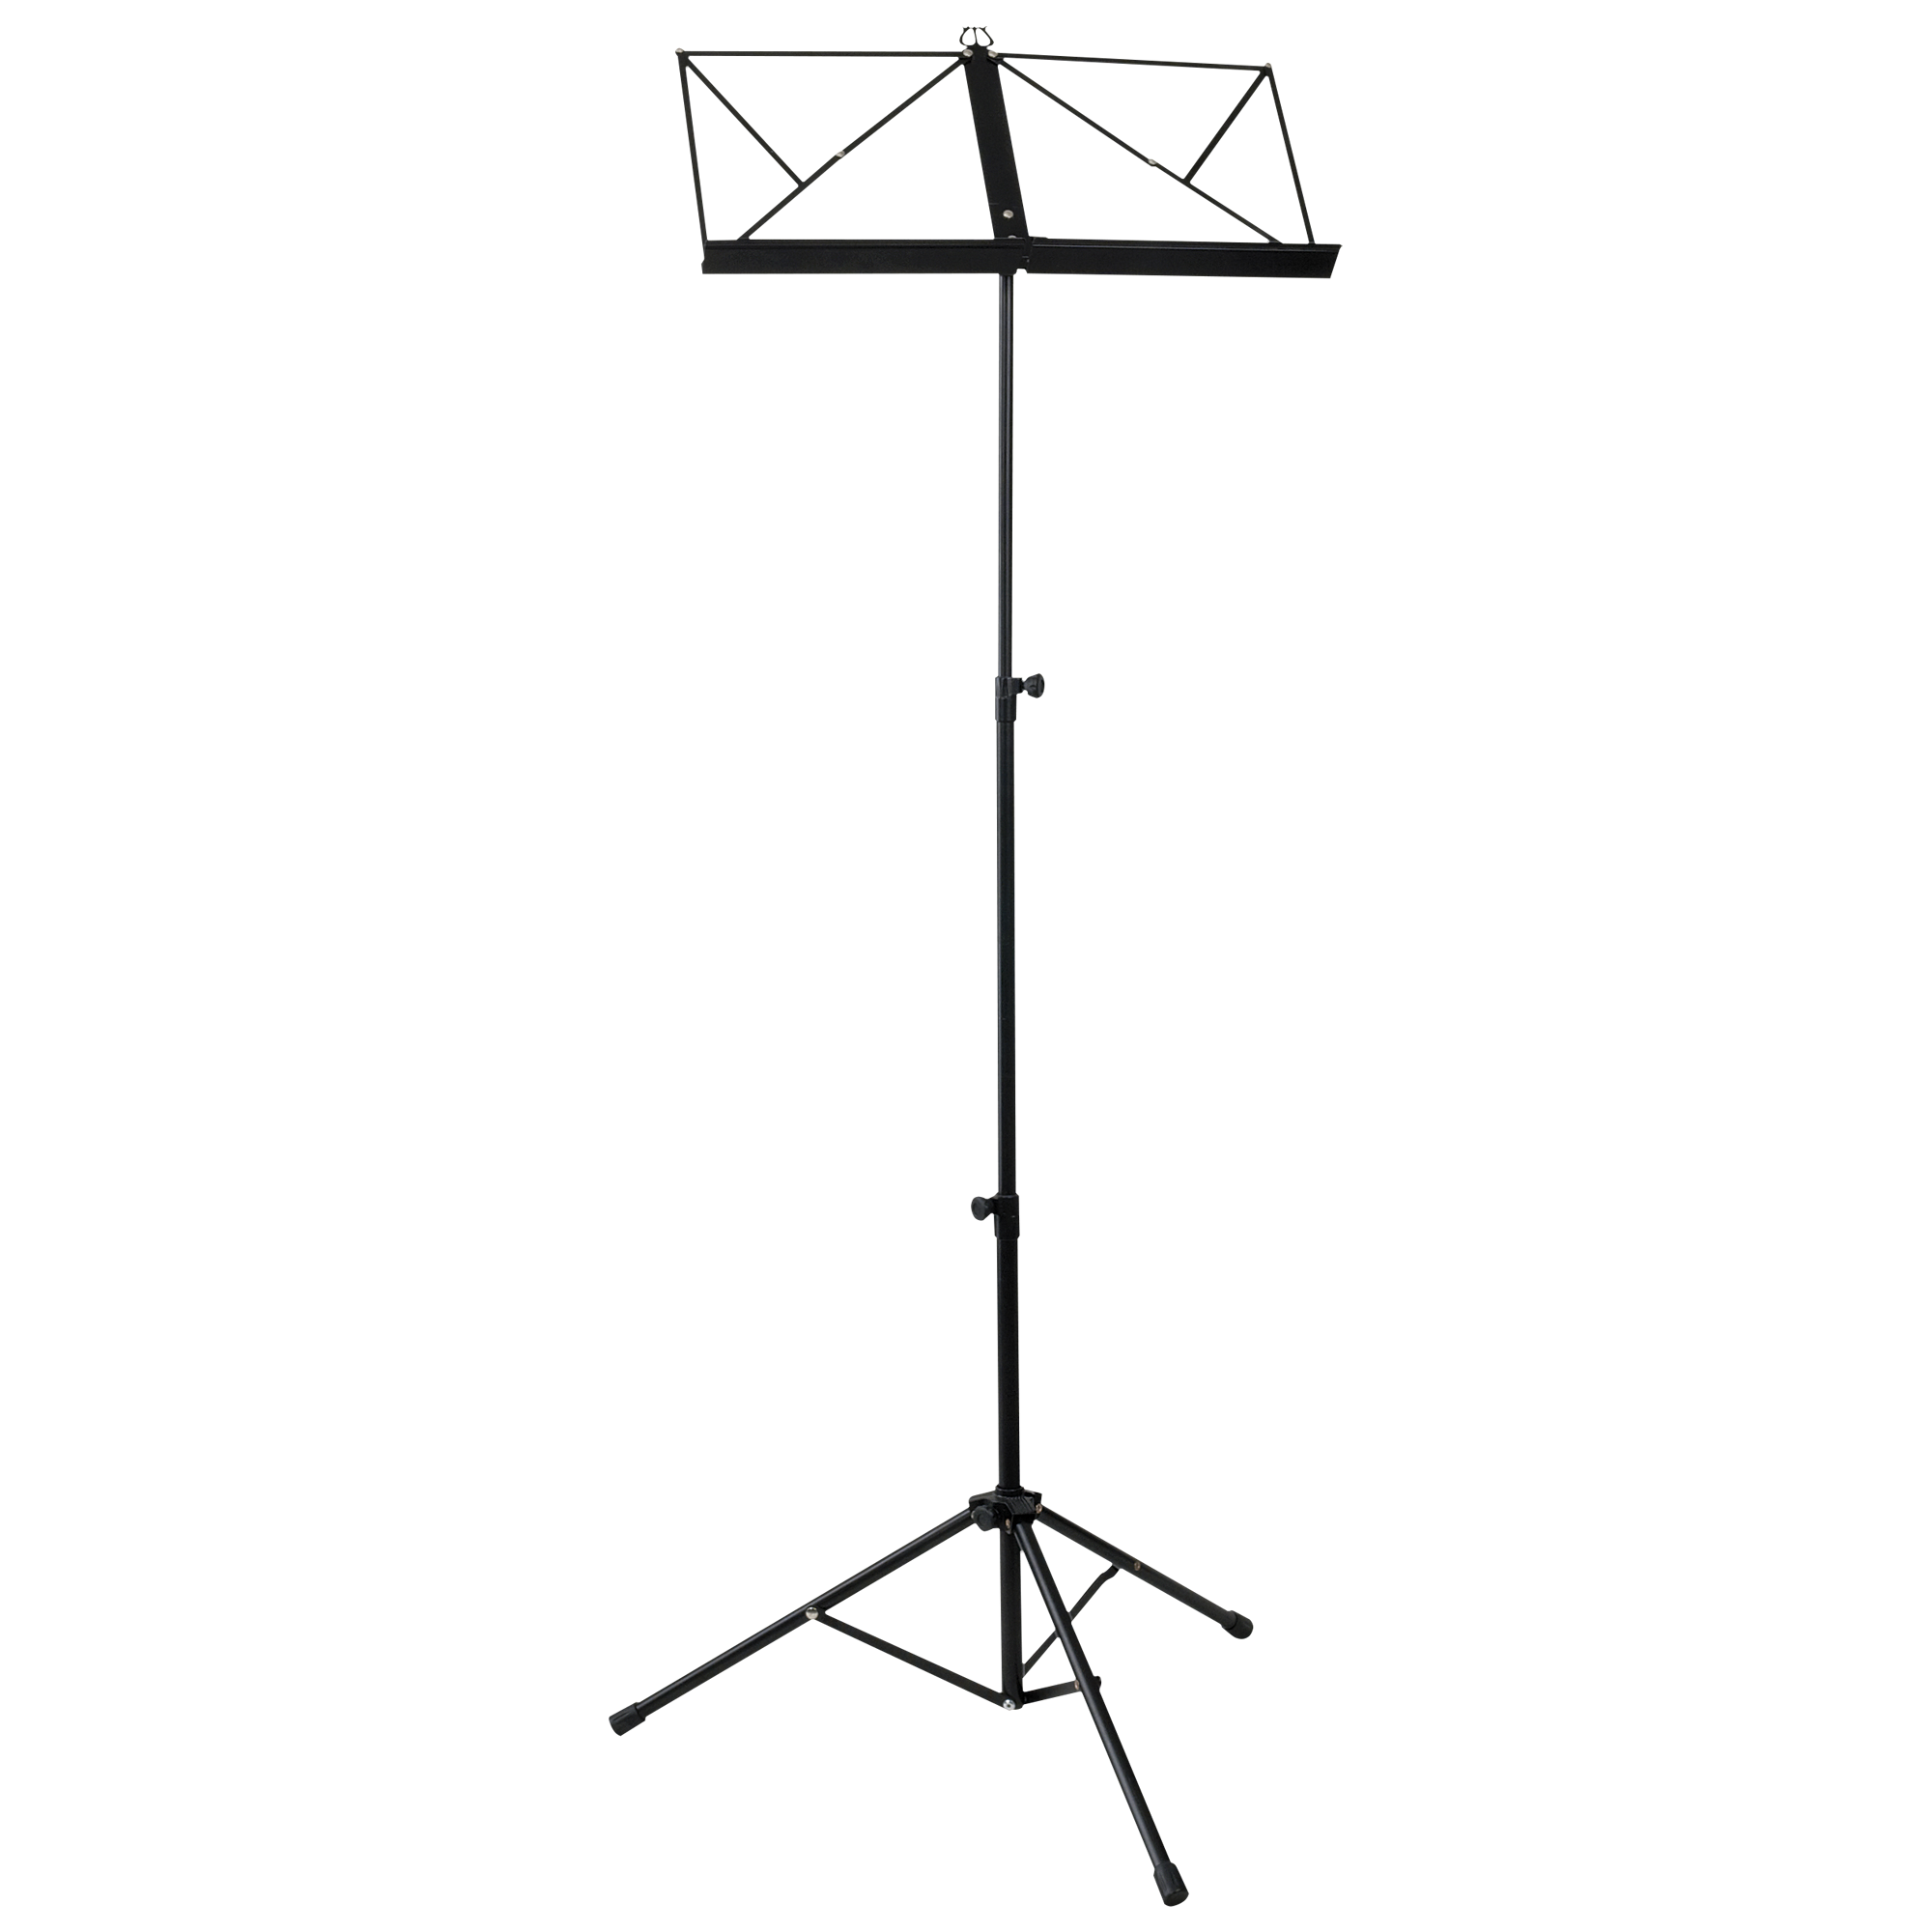 Showgear Music Stand Stahl, 470-1150mm